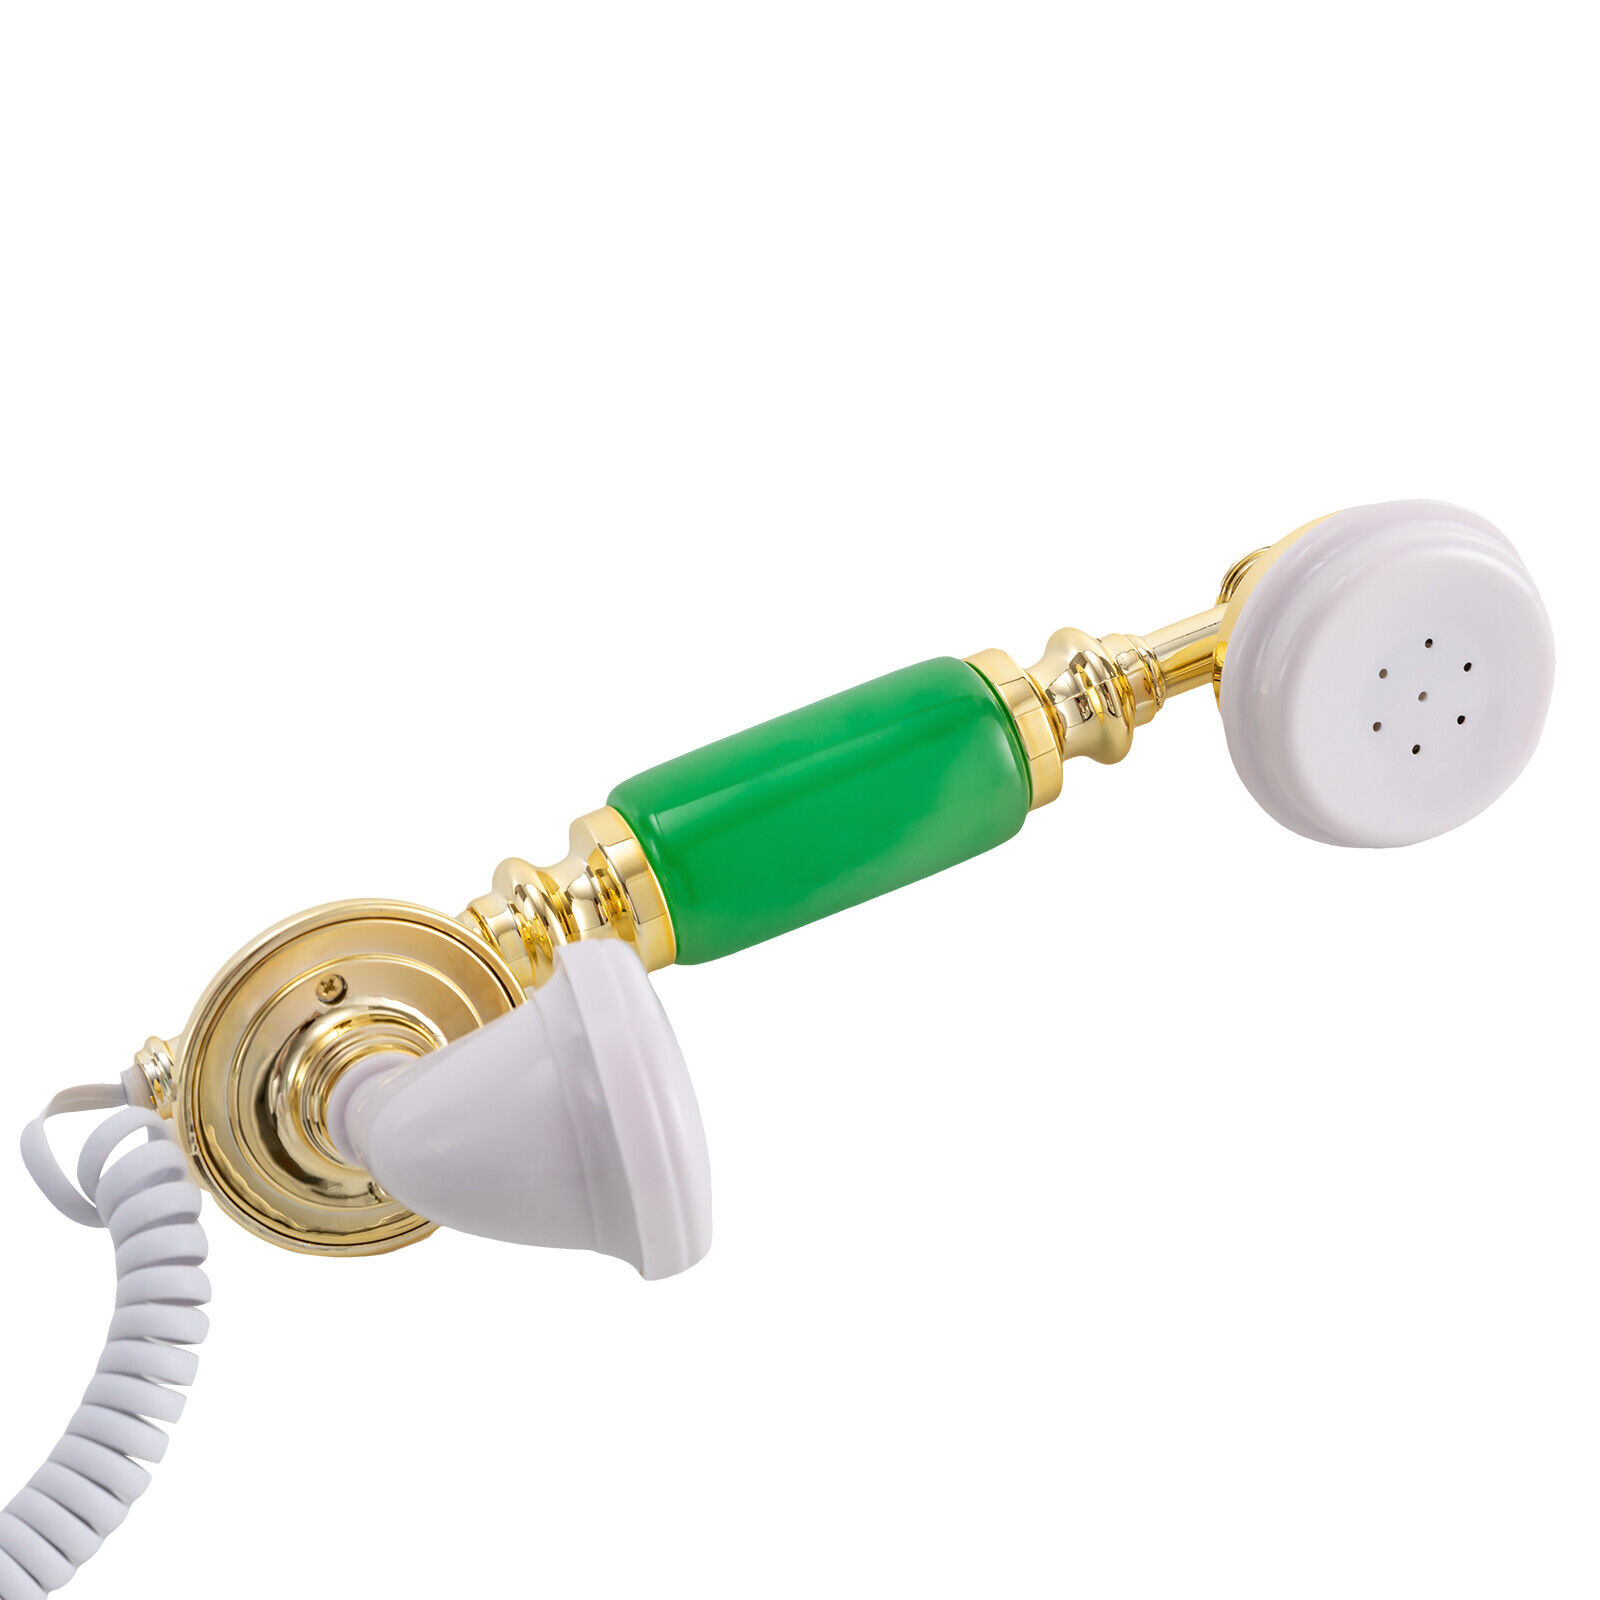 Retro Horse Design Telephone Dial Corded Phone Exquisite Workmanship Green NEW Unbranded Does not apply - фотография #10